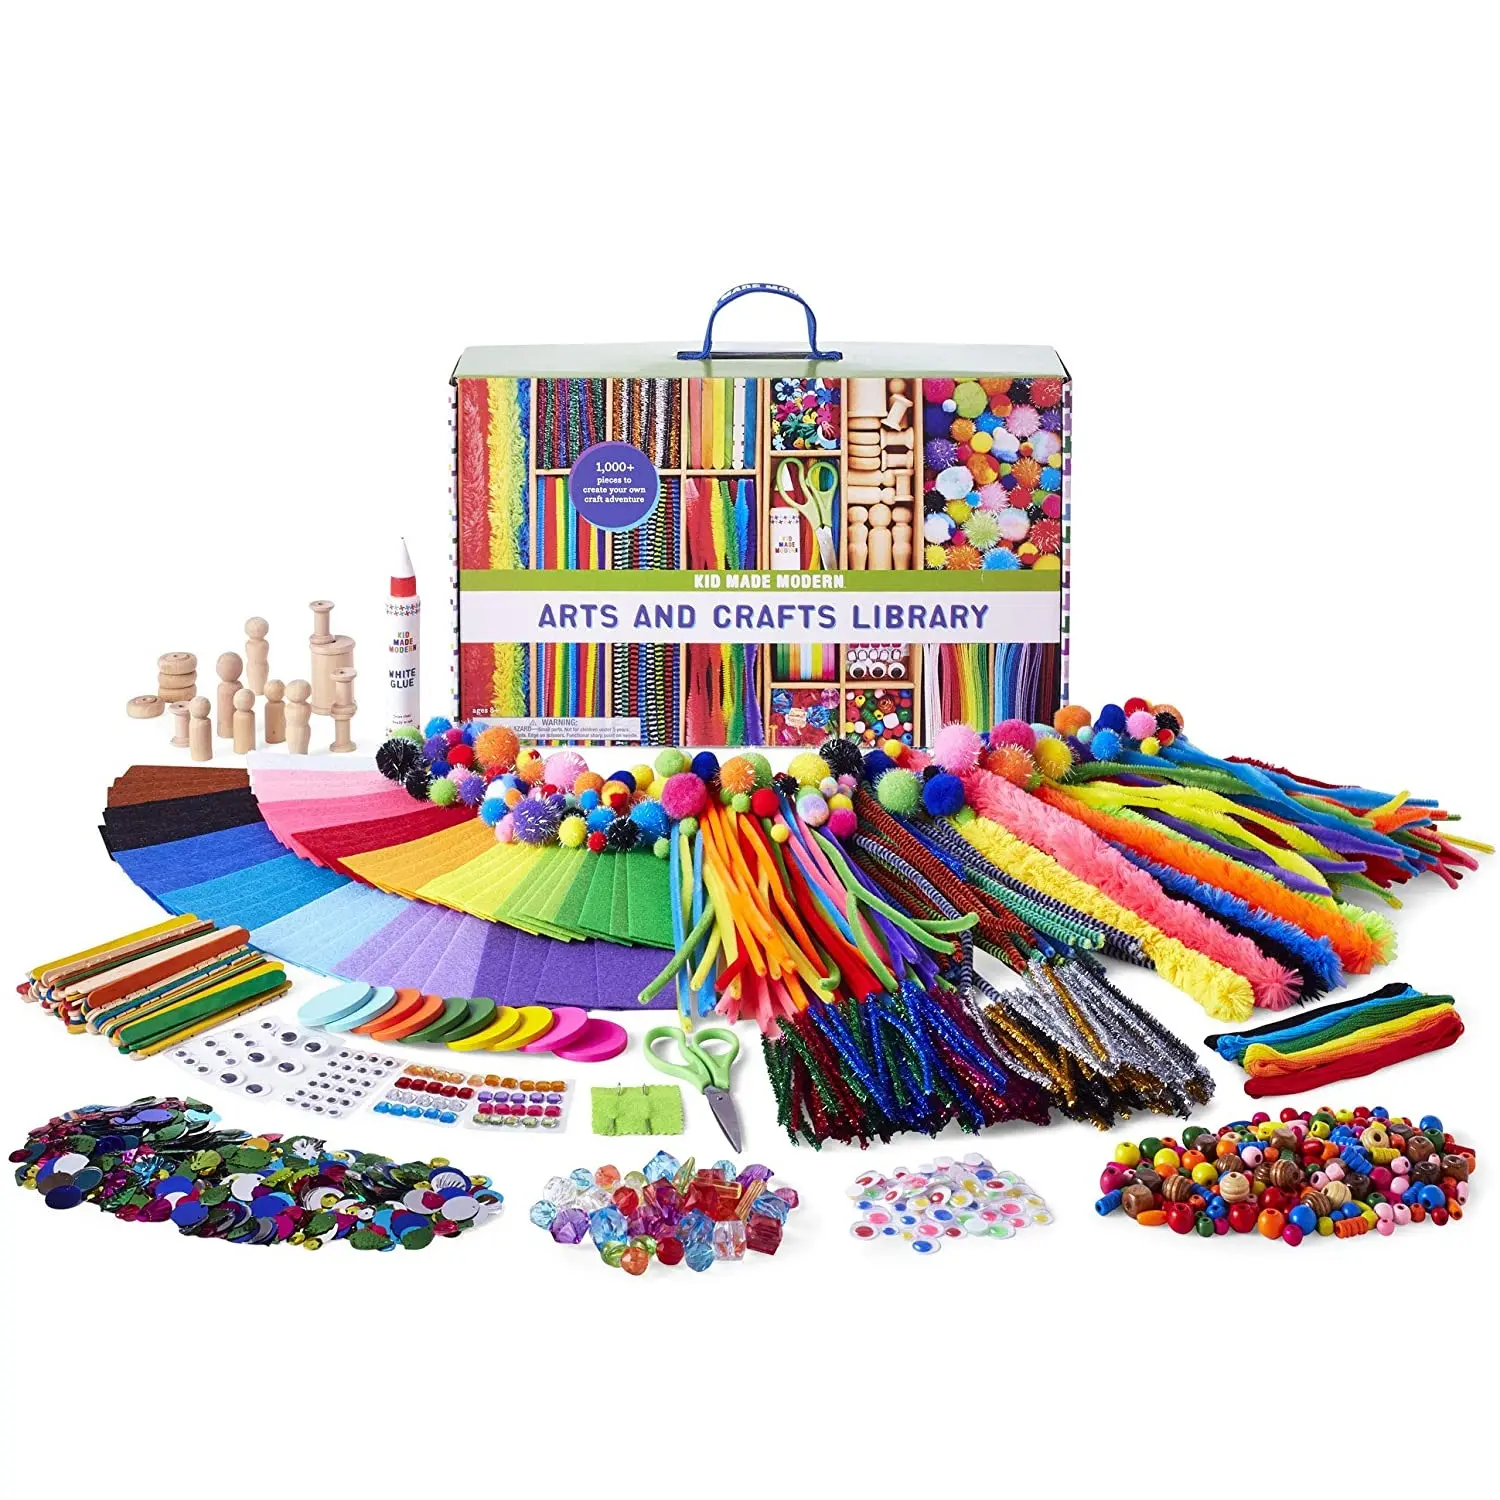 Kids Puzzle Manual Material Kit 1200pcs DIY Coloring Arts and Crafts Supply for Kindergarten Primary School Education